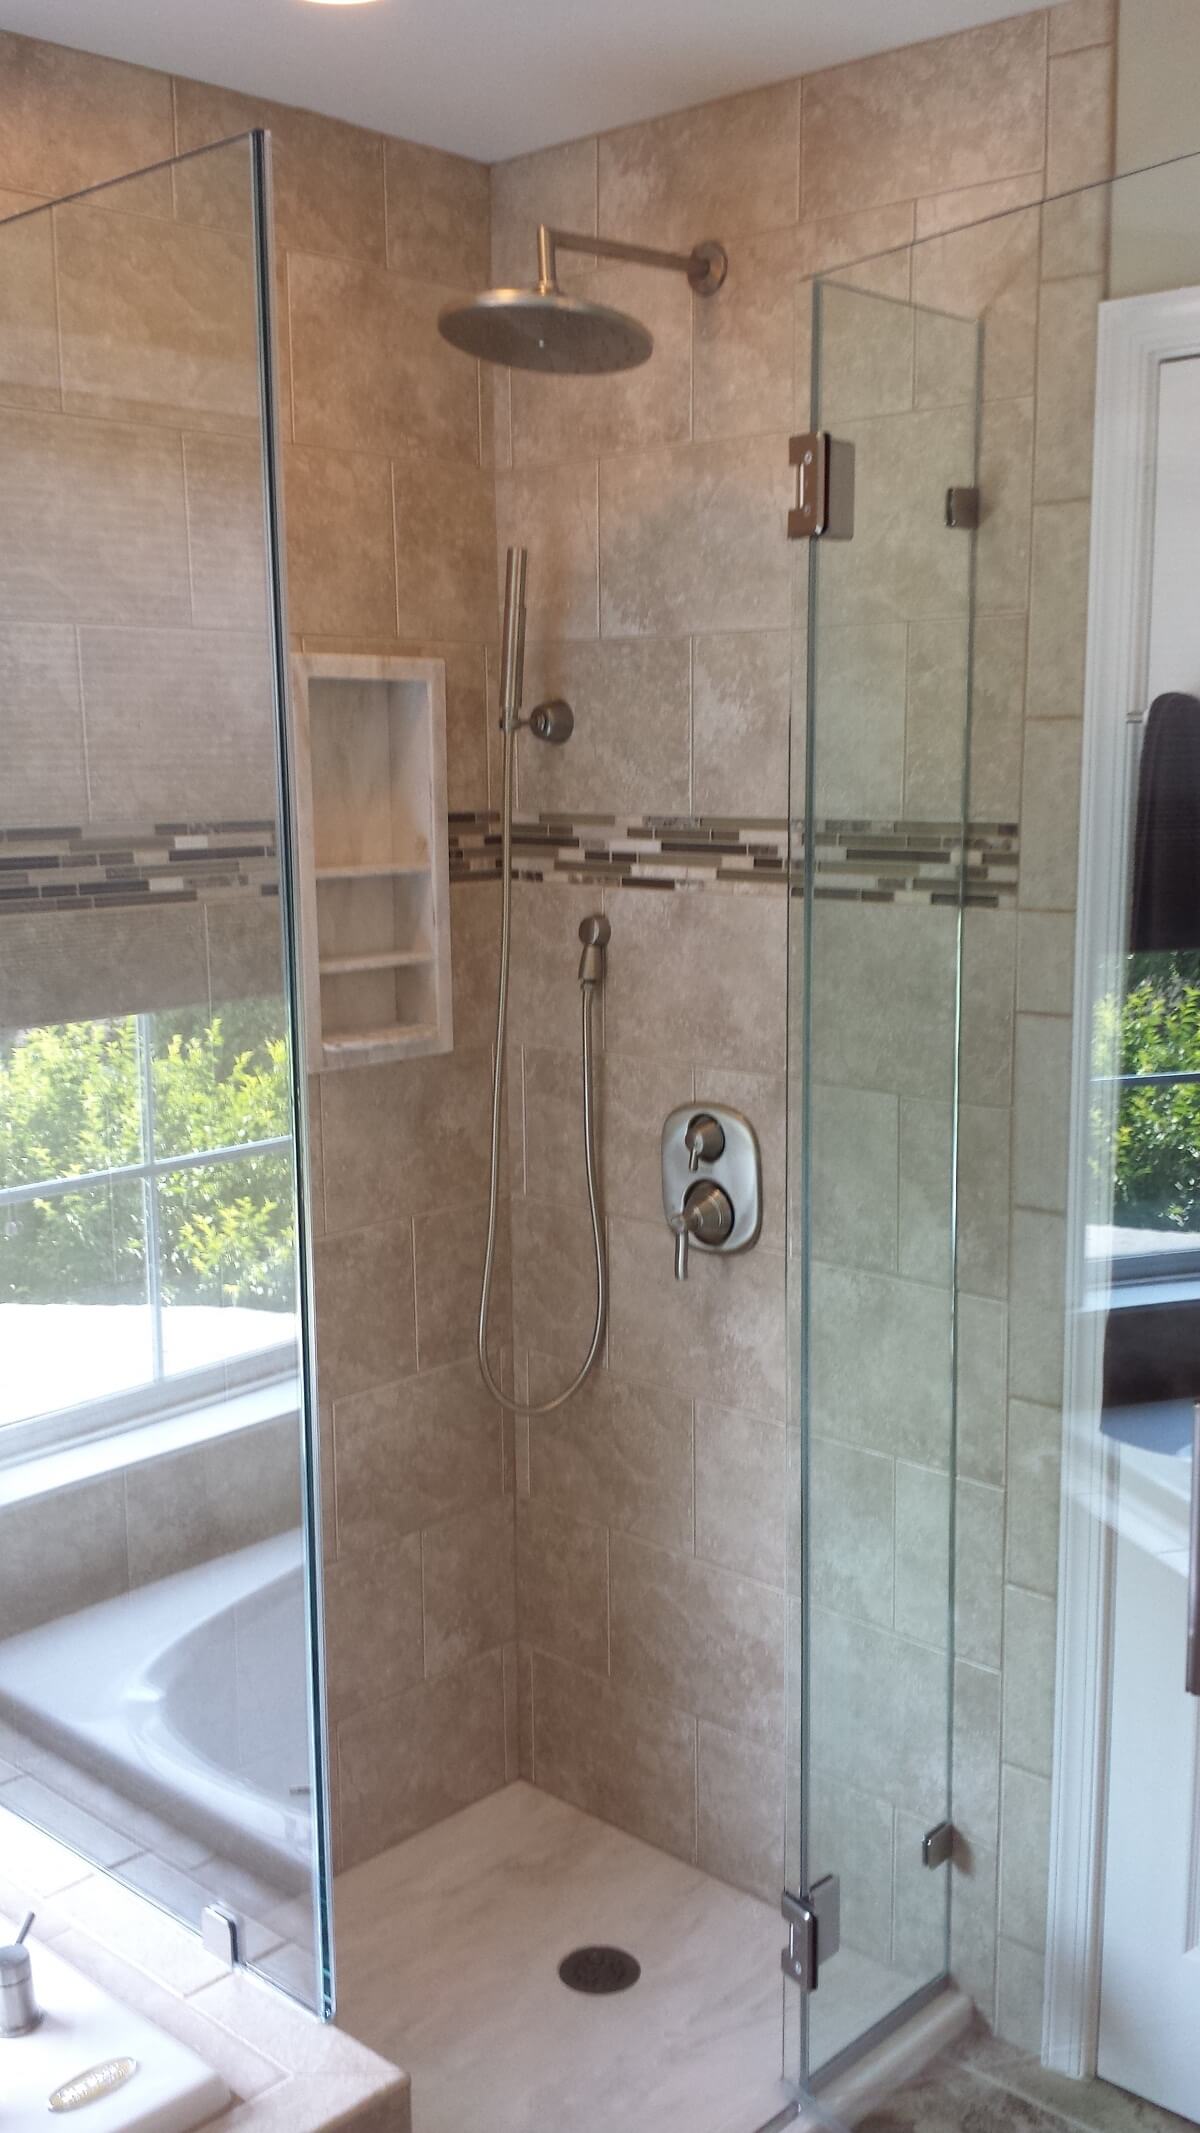 Tile shower with glass doors